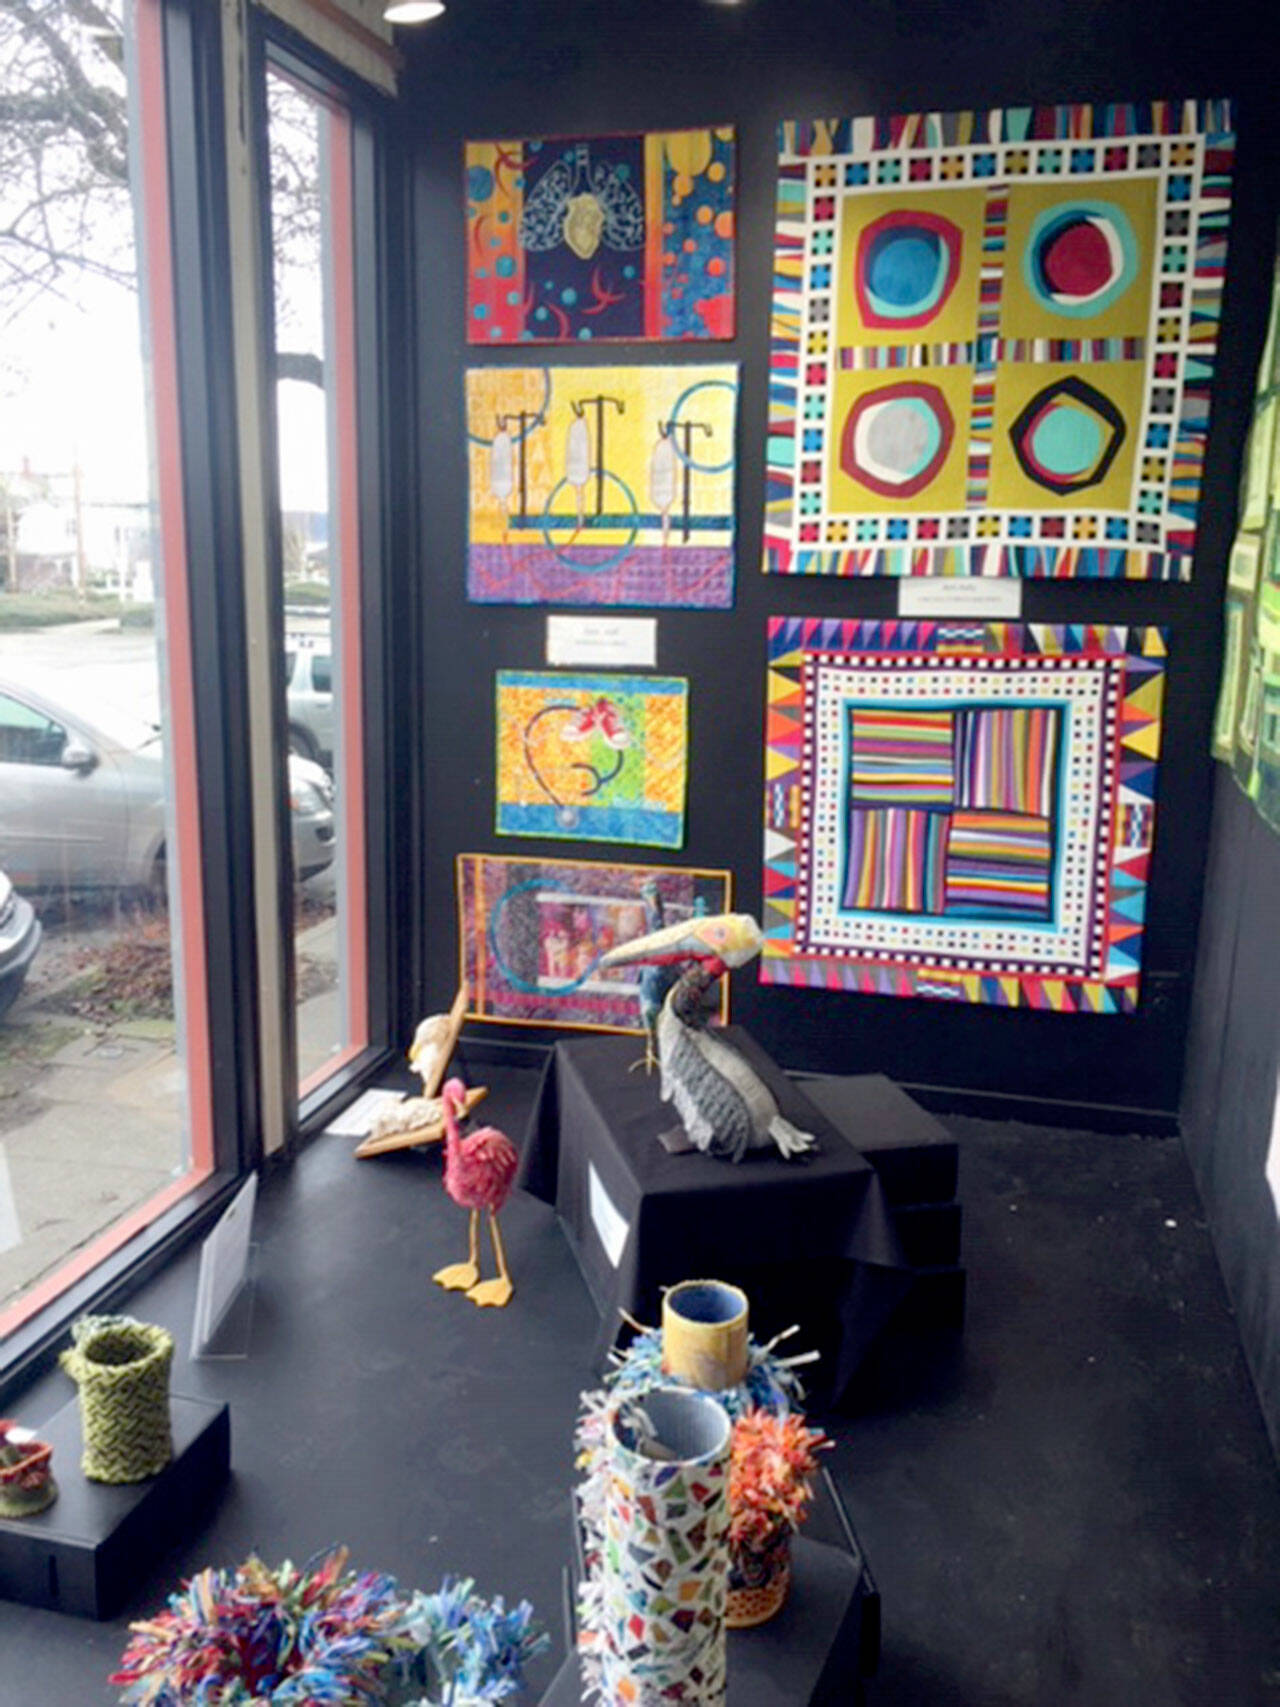 Among the pieces shown are, from left on the wall, quilts by Terri Wolf and Jeri Auty, both from Port Ludlow, and below, sculptures by Pat Herkal, with (foreground) ply-split vessels by Cathie Wier and 3-D constructions by Deb Olson, both from Port Townsend.